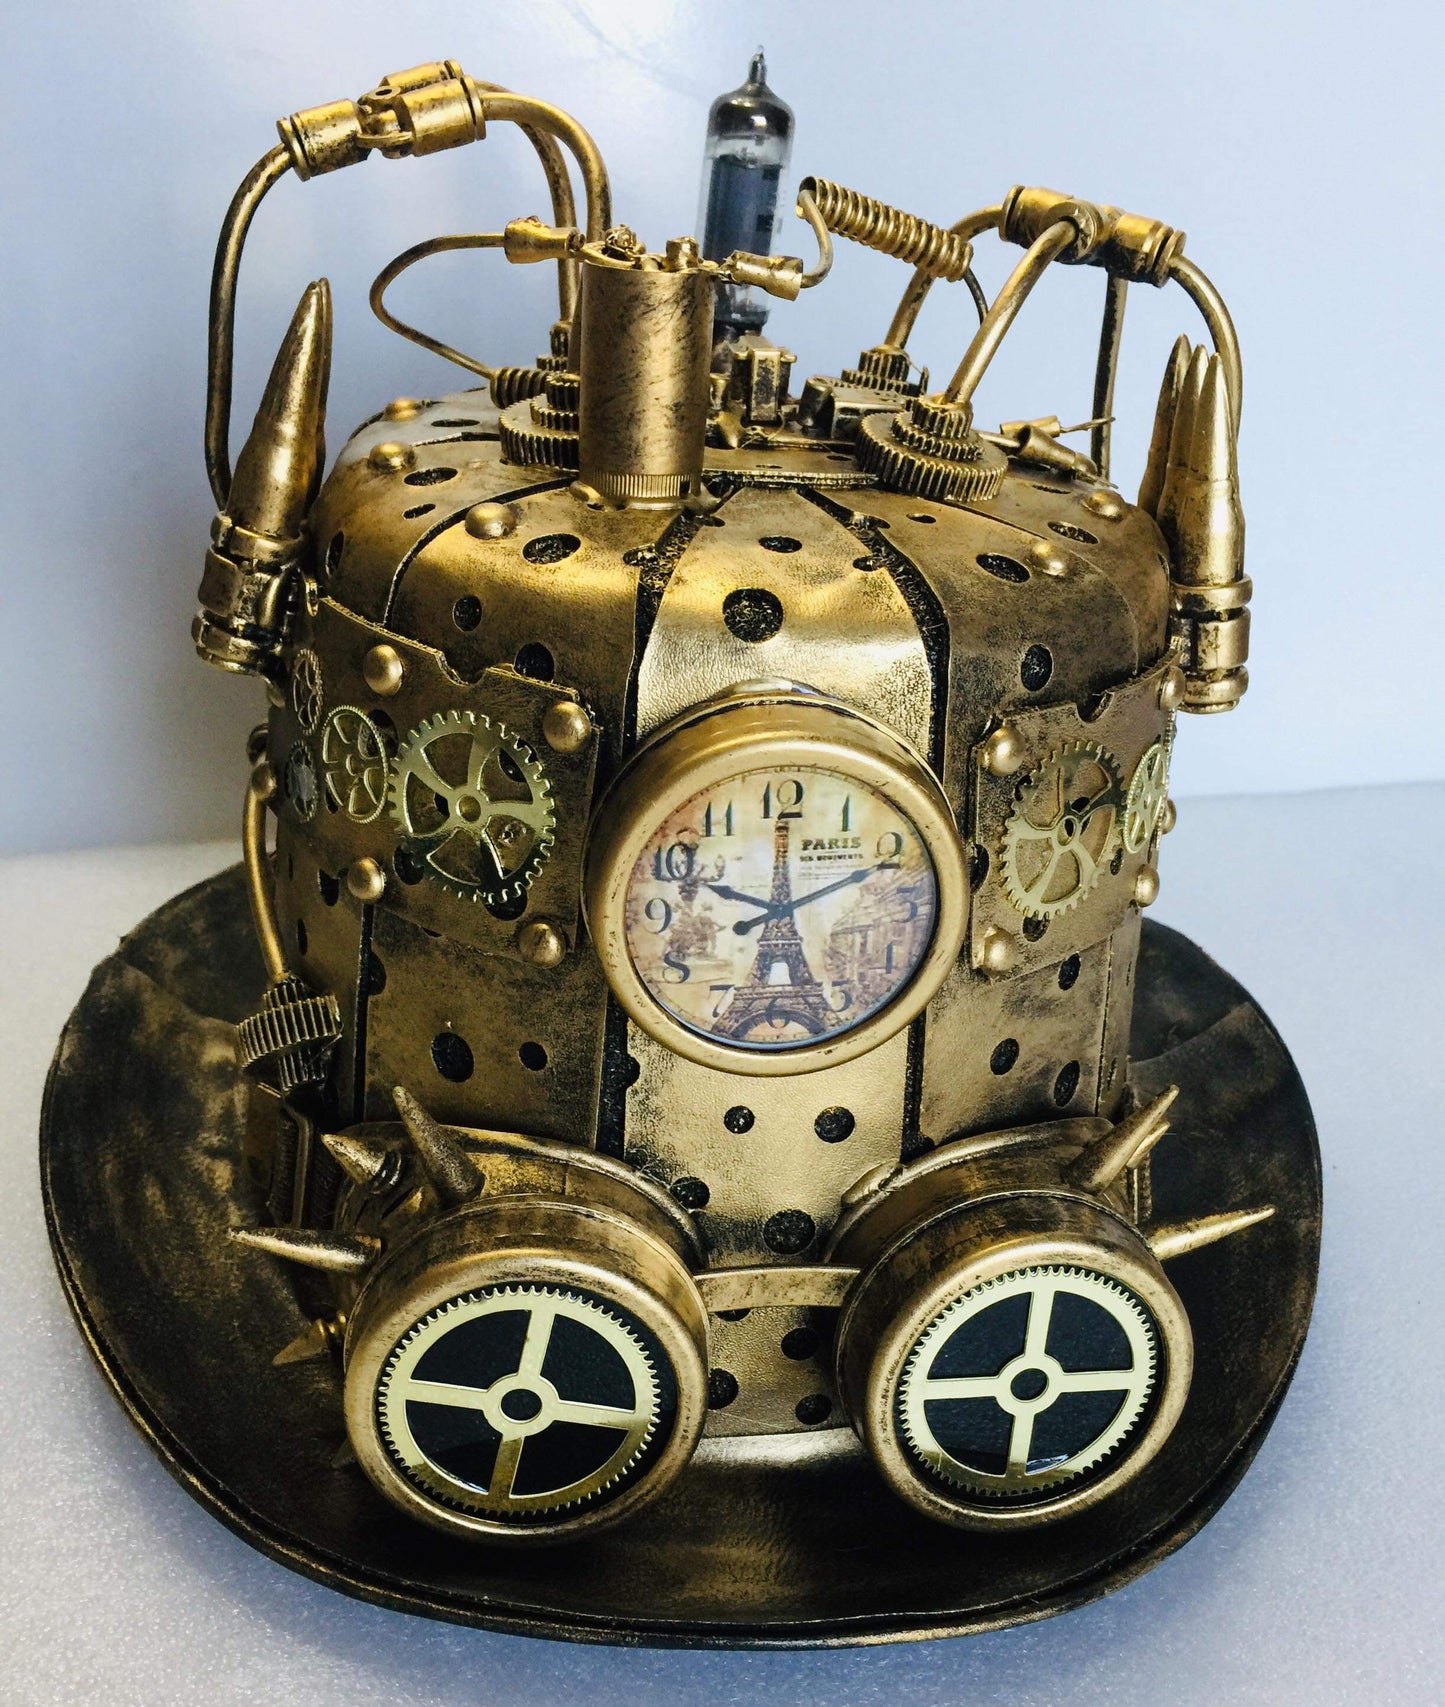 Steampunk Hat with goggles